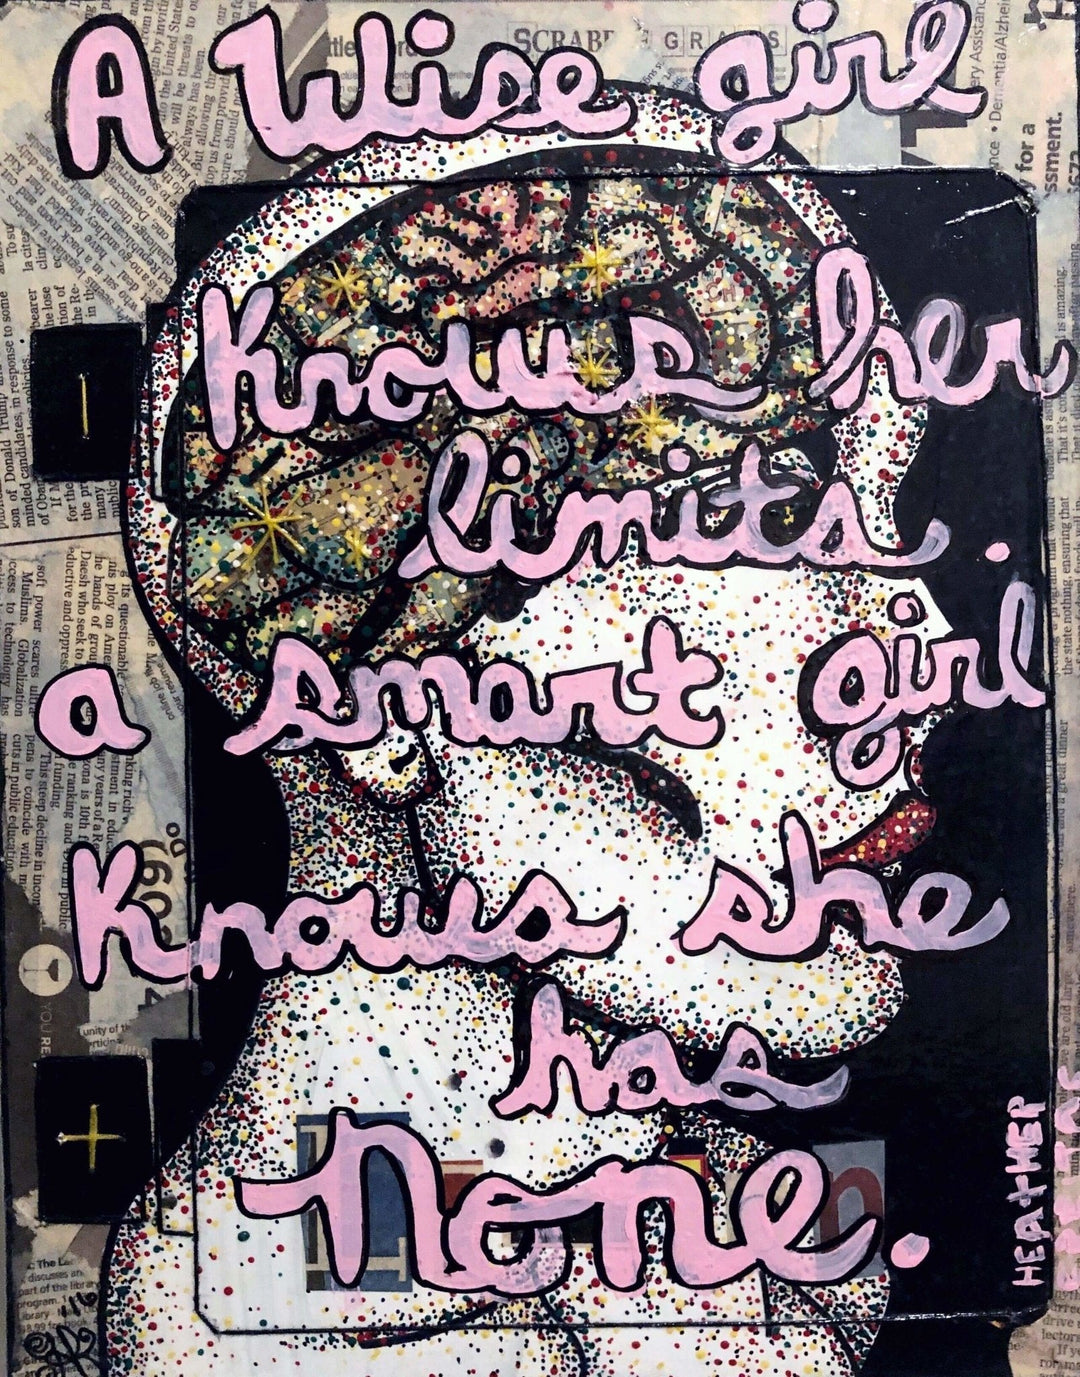 A wise Girl Knows Her Limits, A Smart Girl Knows She Has None - Original inspiring painting quote - Heather Freitas - fine art home deccor